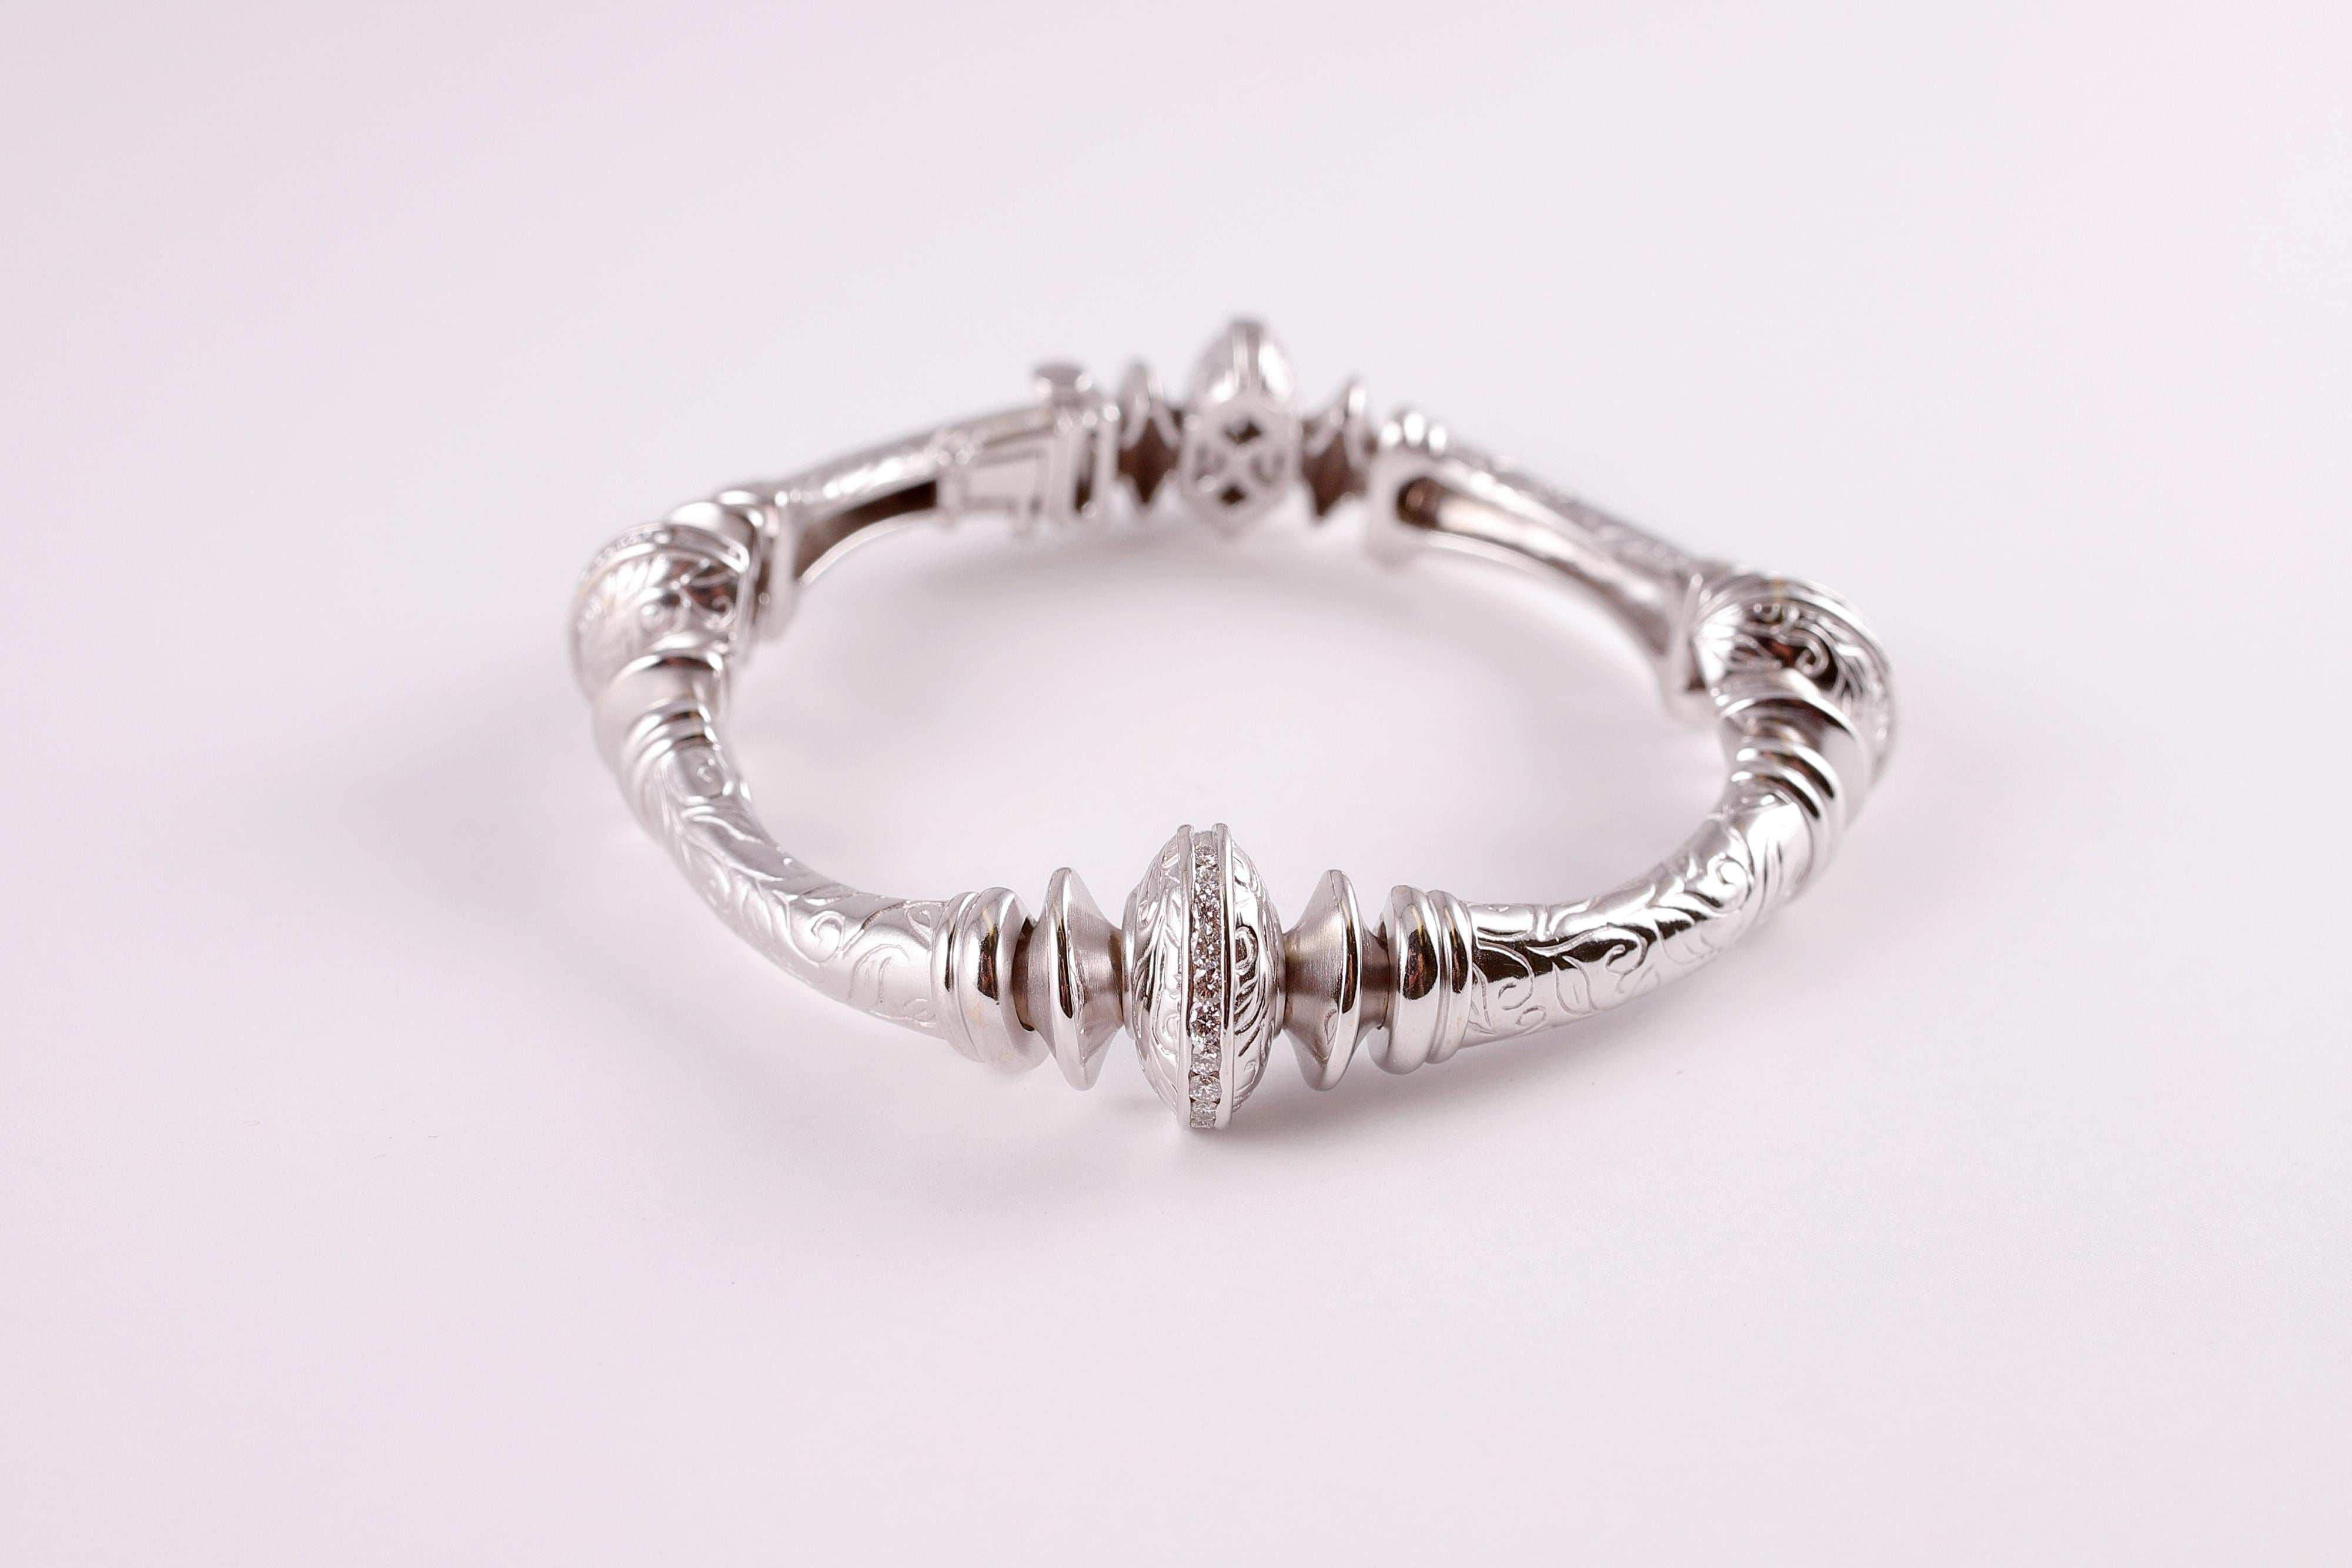 White Gold Diamond Bracelet by Seidengang from the Laurel Collection 4